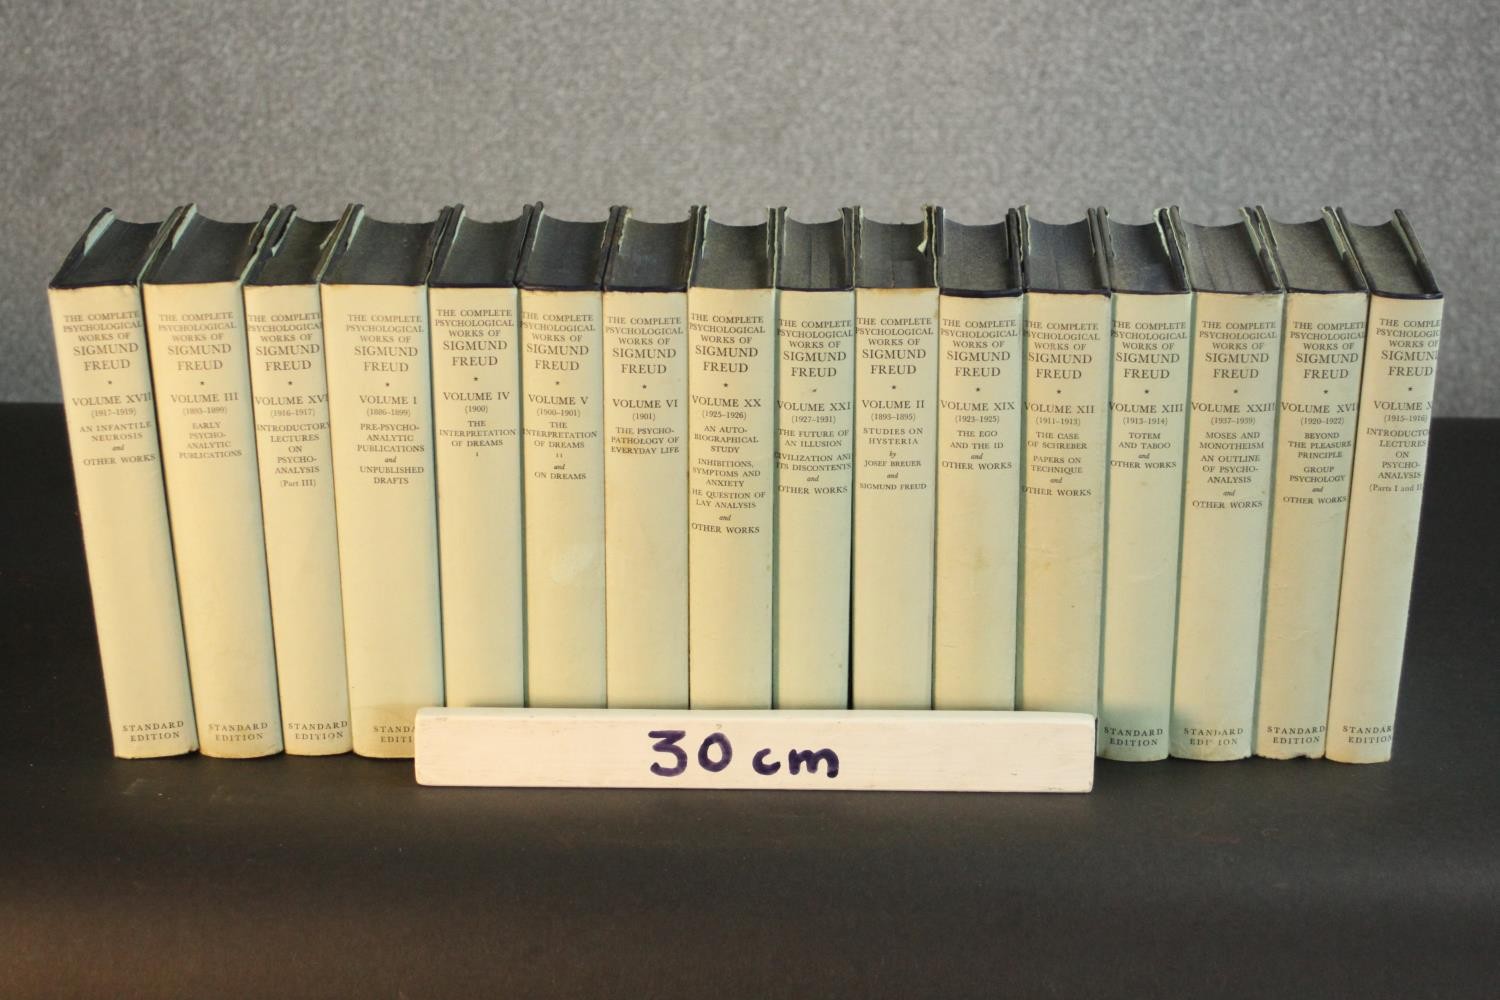 Sixteen volumes of the Complete Psychological Works of Sigmund Freud and other works by Sigmund - Image 2 of 7